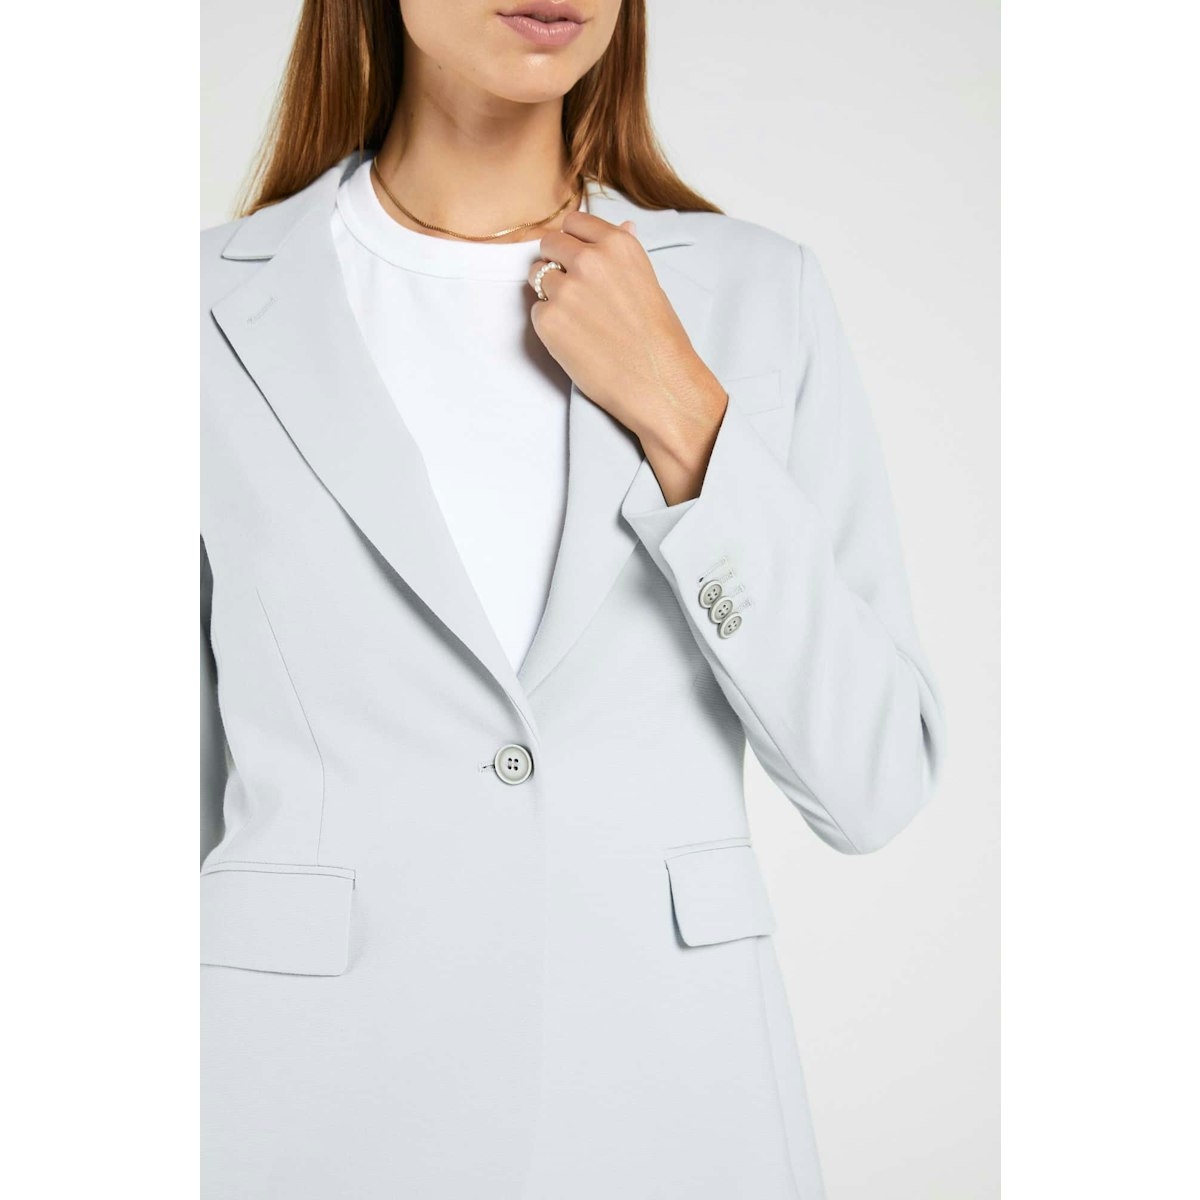 InStitchu Collection The Cawley Powder Grey Jacket